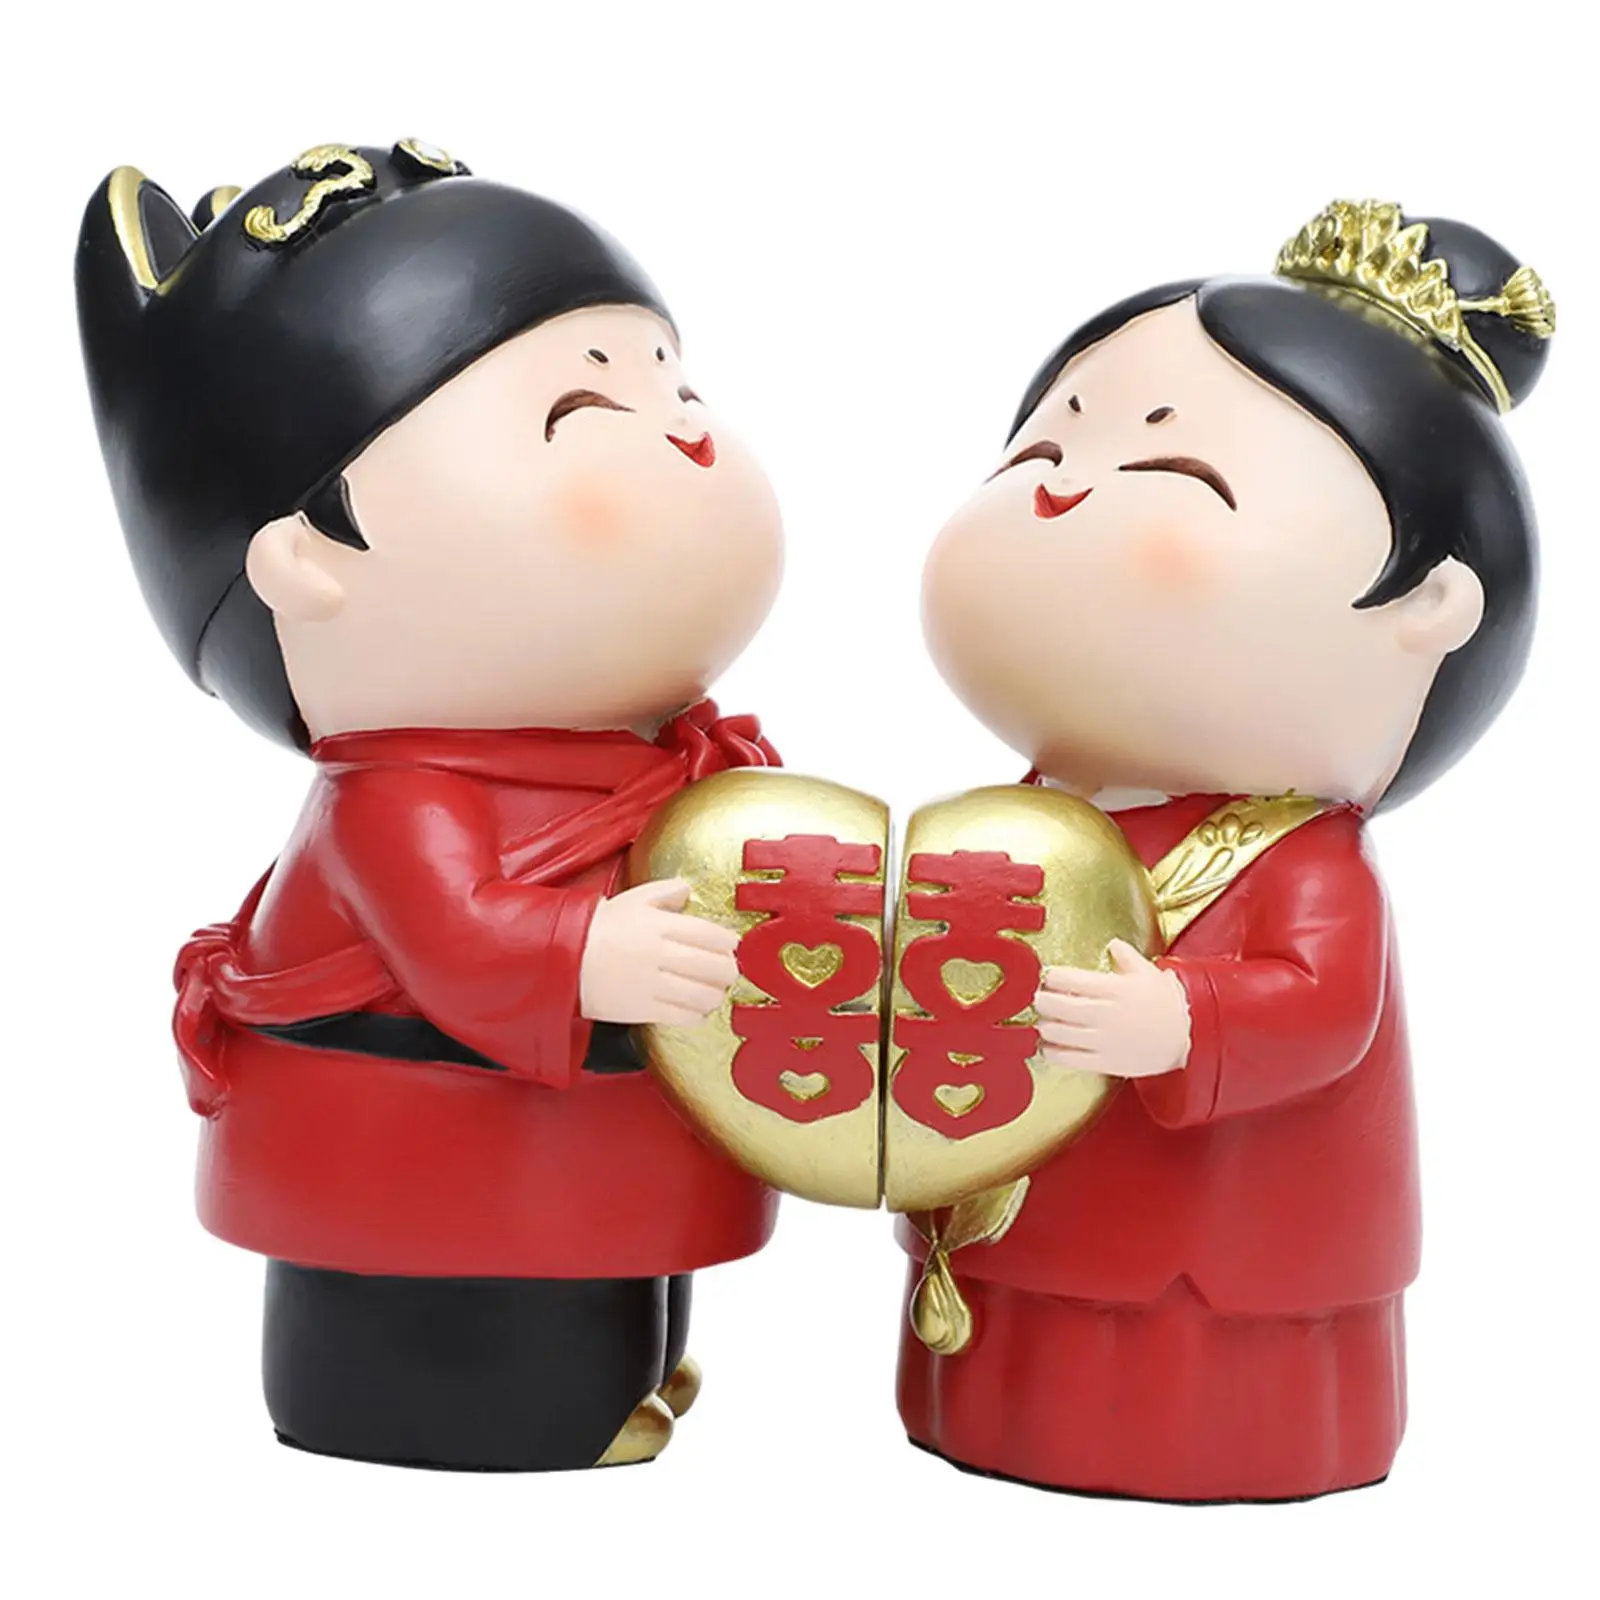 Wedding Couple Sculpture Wedding Doll Decorations Resin Chinese for Couples Bride and Groom Figurine for Gift Cafe Home Decor